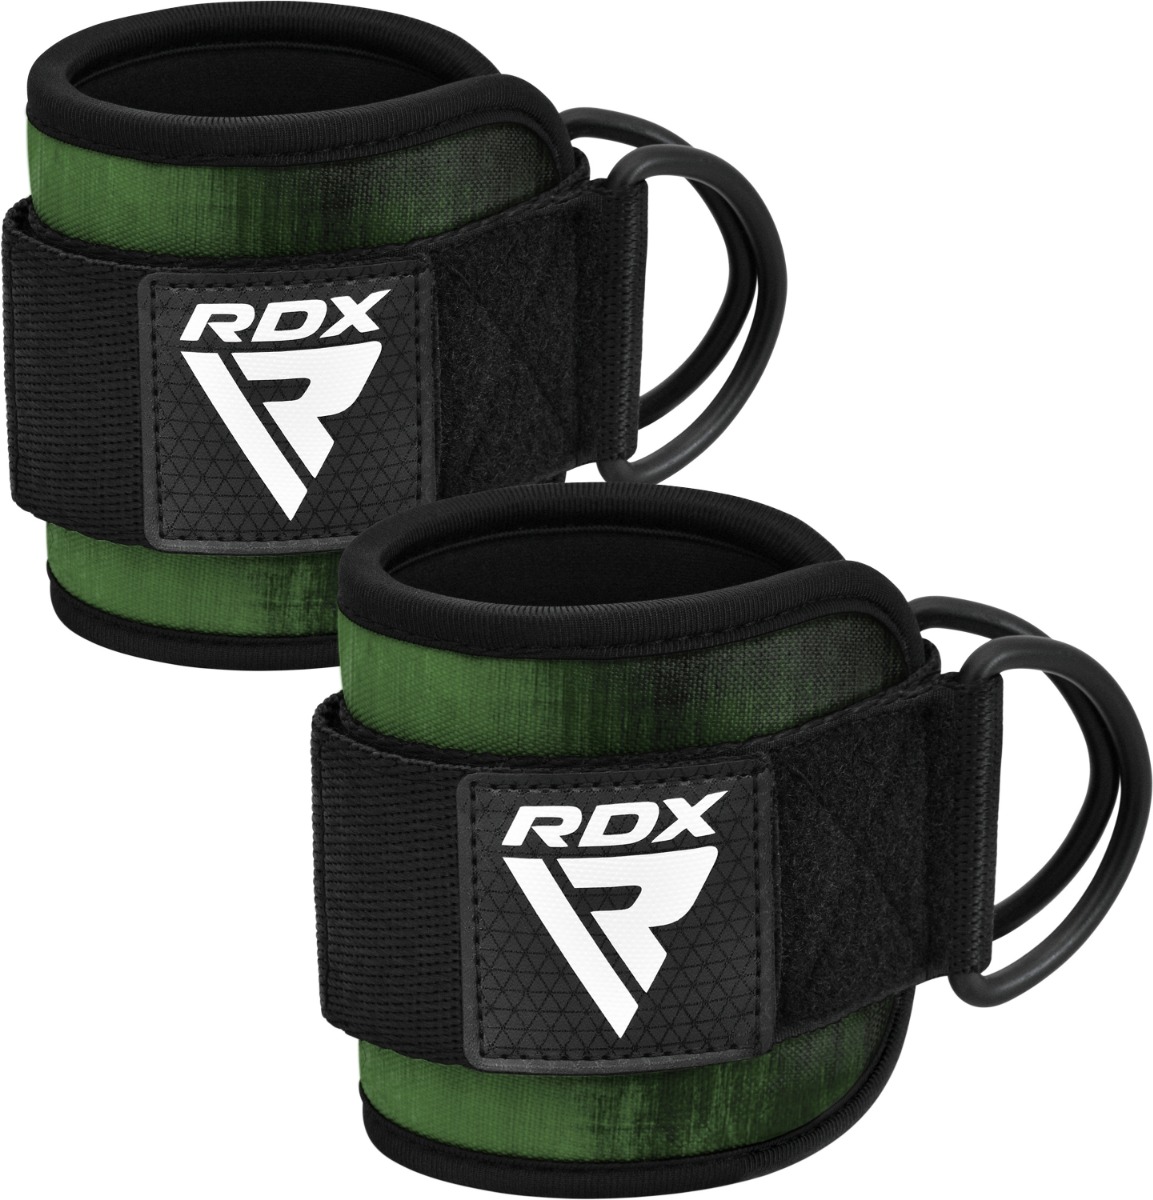 RDX A4 Ankle Straps For Gym Cable Machine-Army Green -Pair